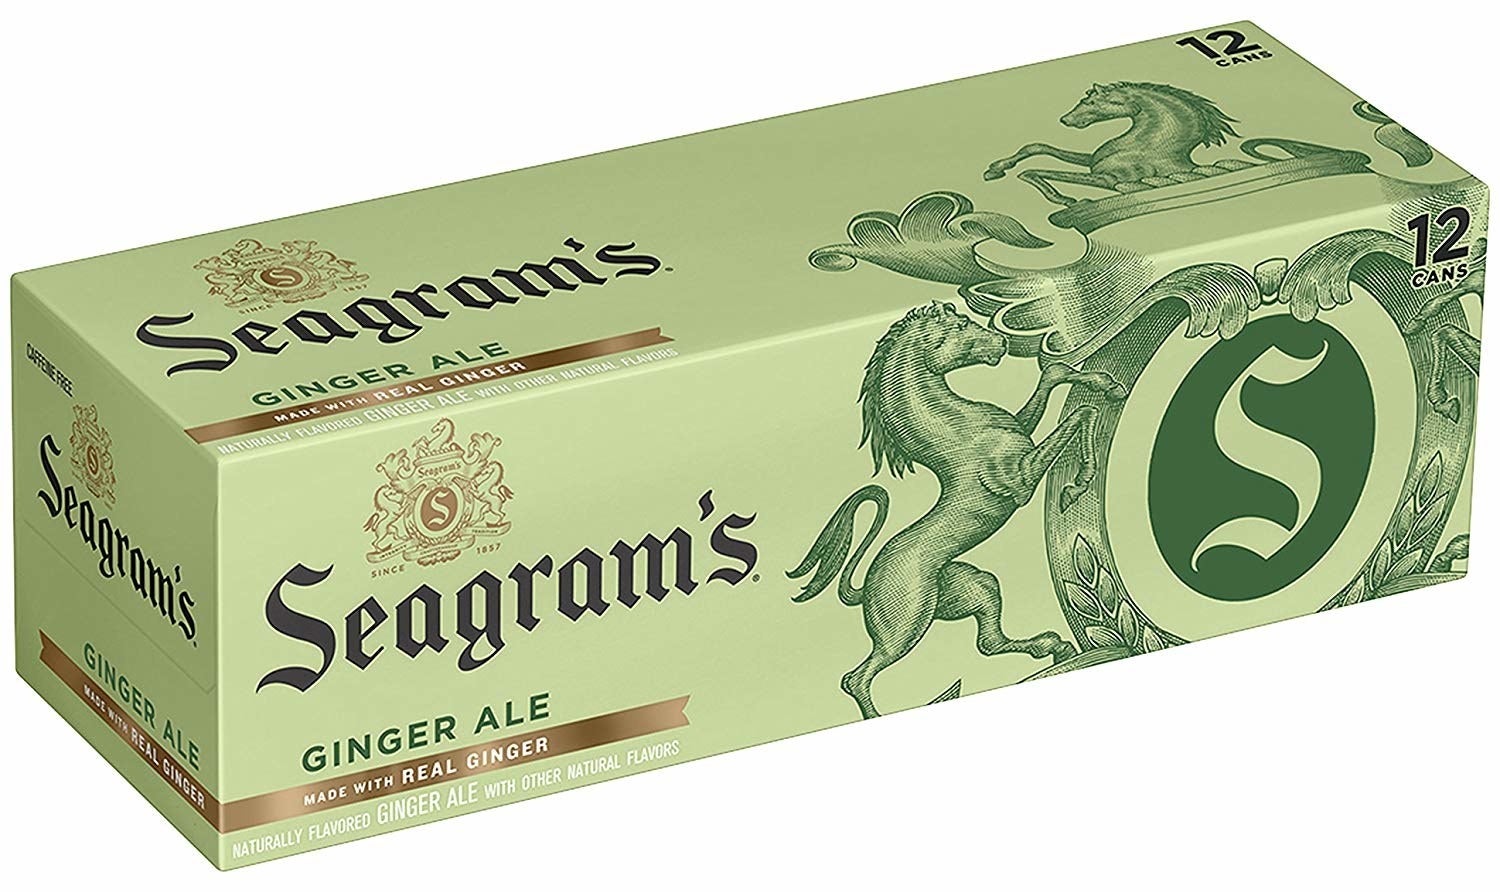 A green box of Seagram&#x27;s canned ginger ale soda. The box shows that it holds 12 cans.